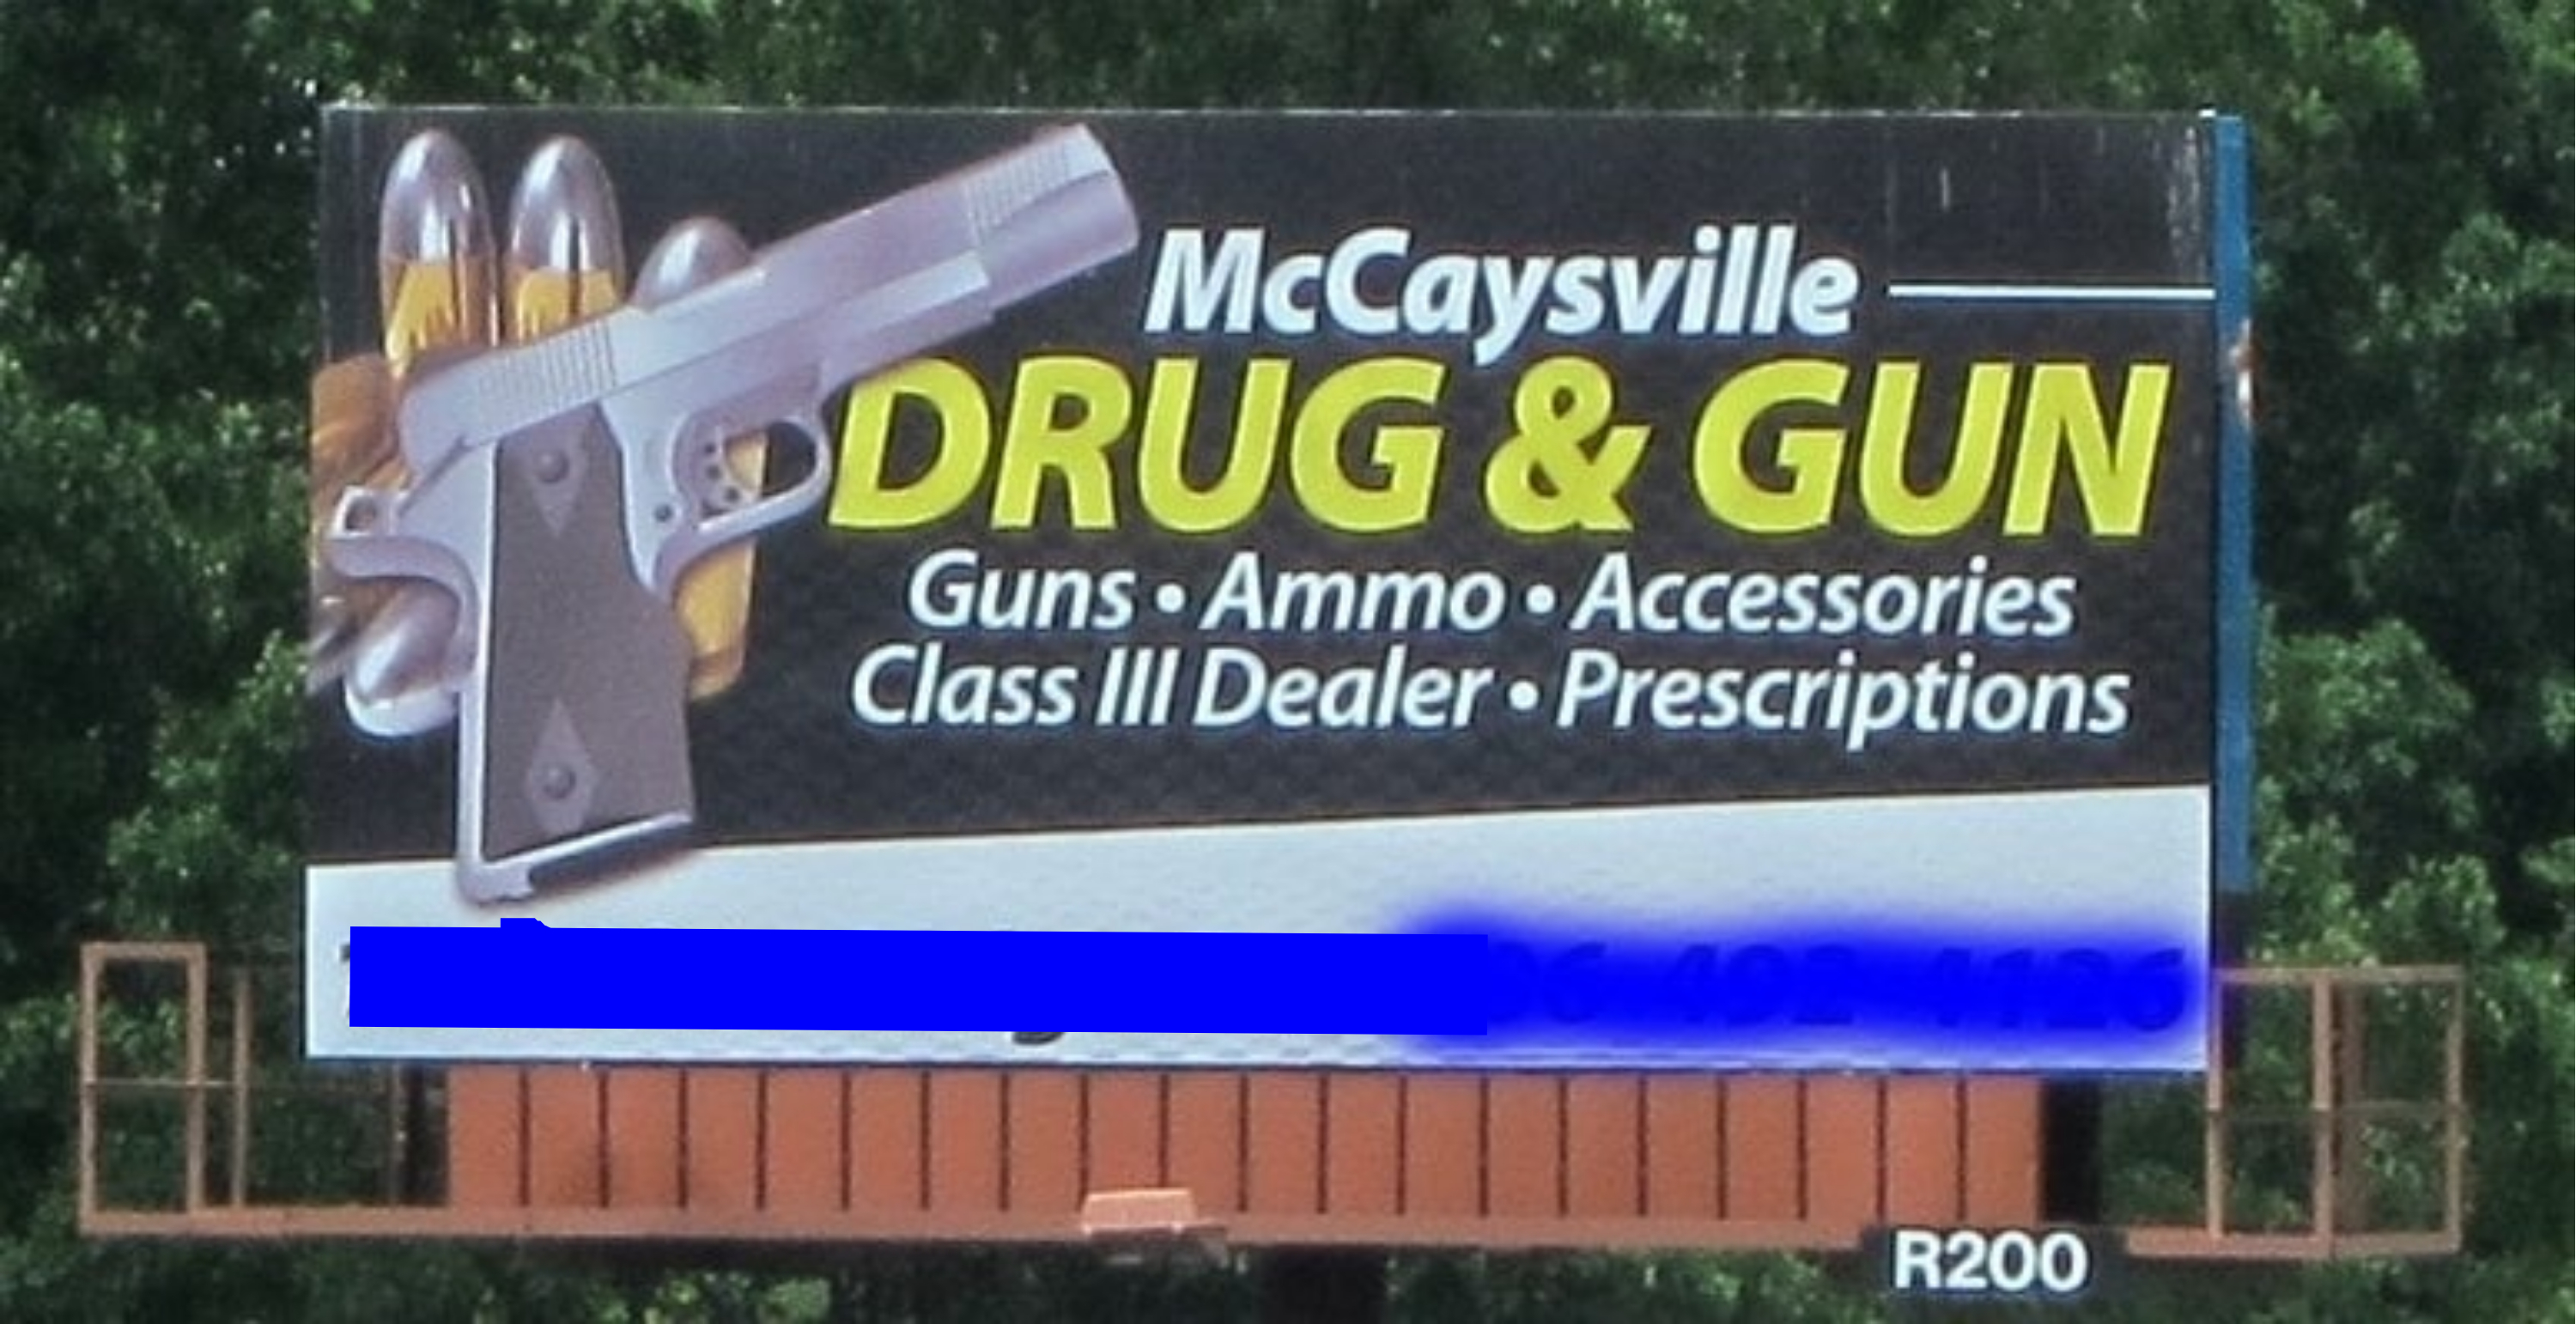 Billboard for McCaysville Drug &amp;amp; Gun store advertising guns, ammo, accessories, and prescriptions with a graphic of a pistol and pills. Address obscured